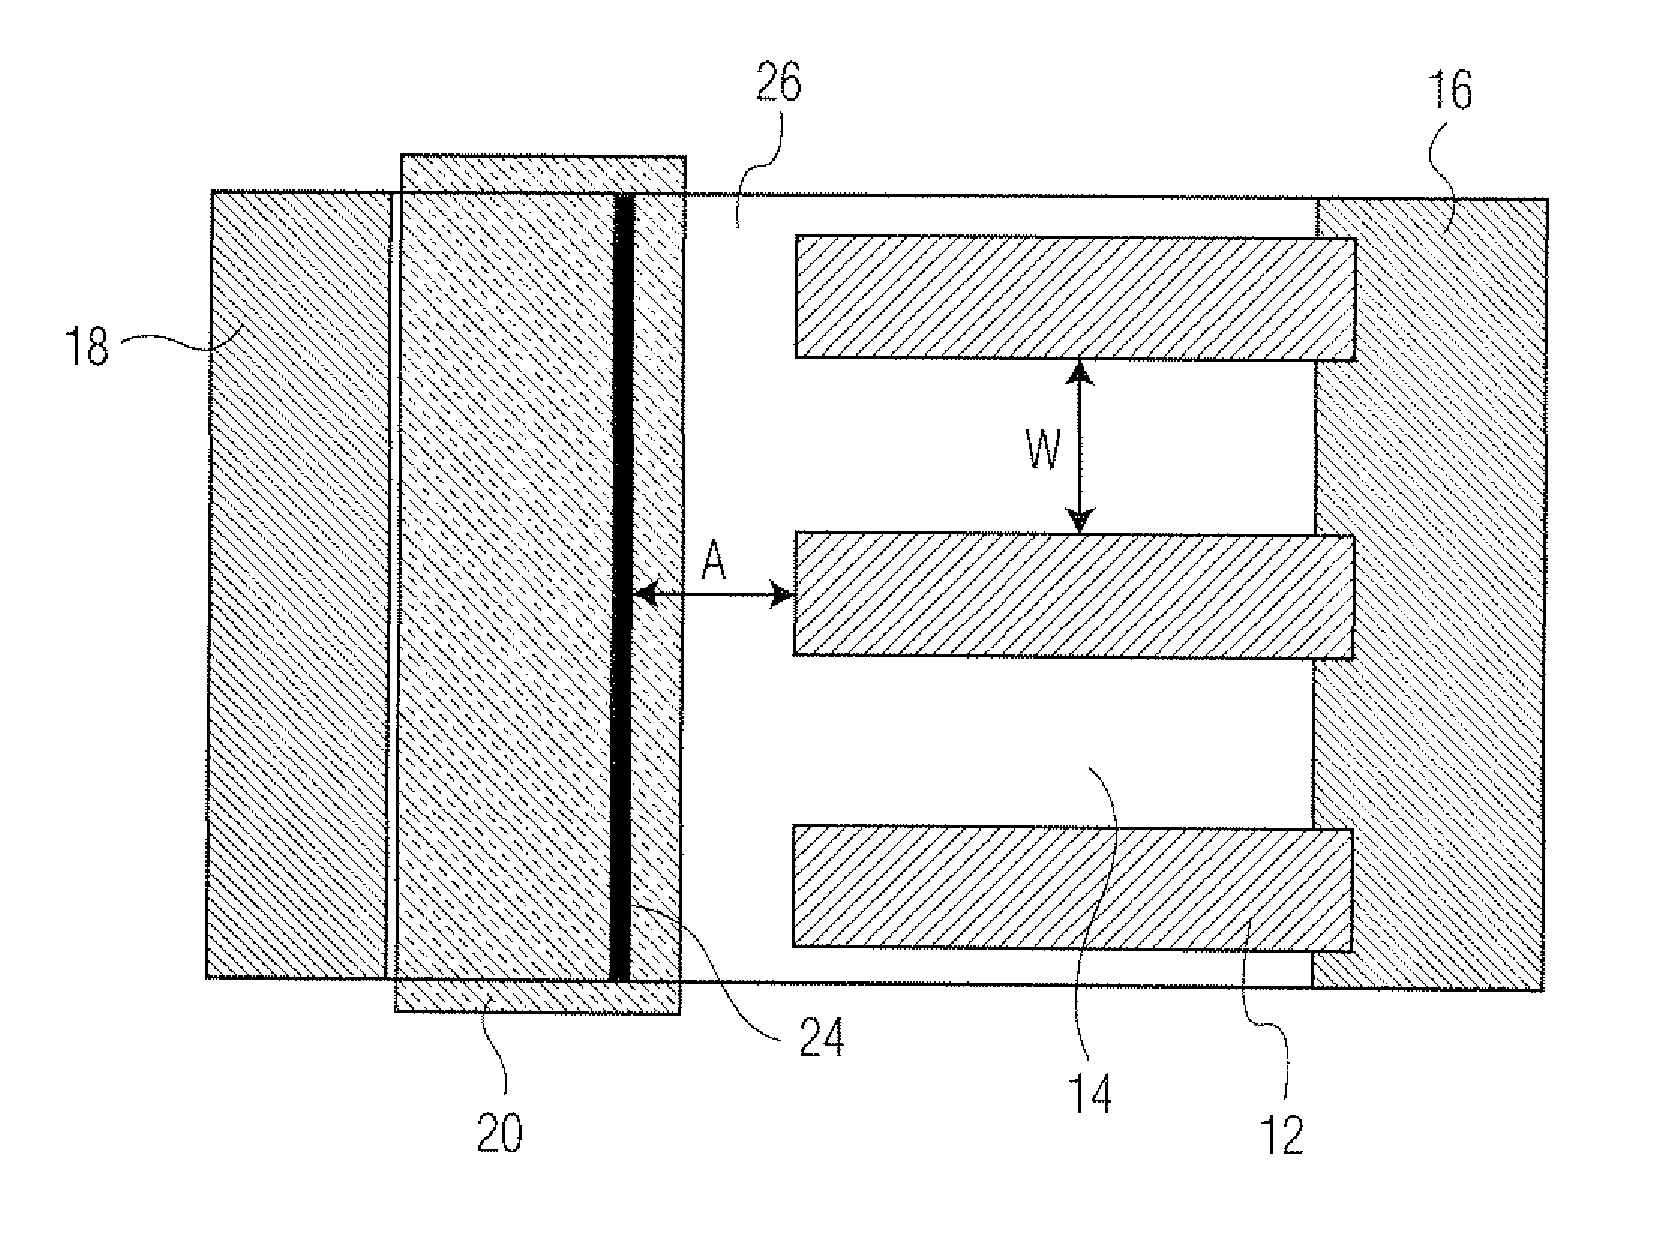 Semiconductor device and method having trenches in a drain extension region